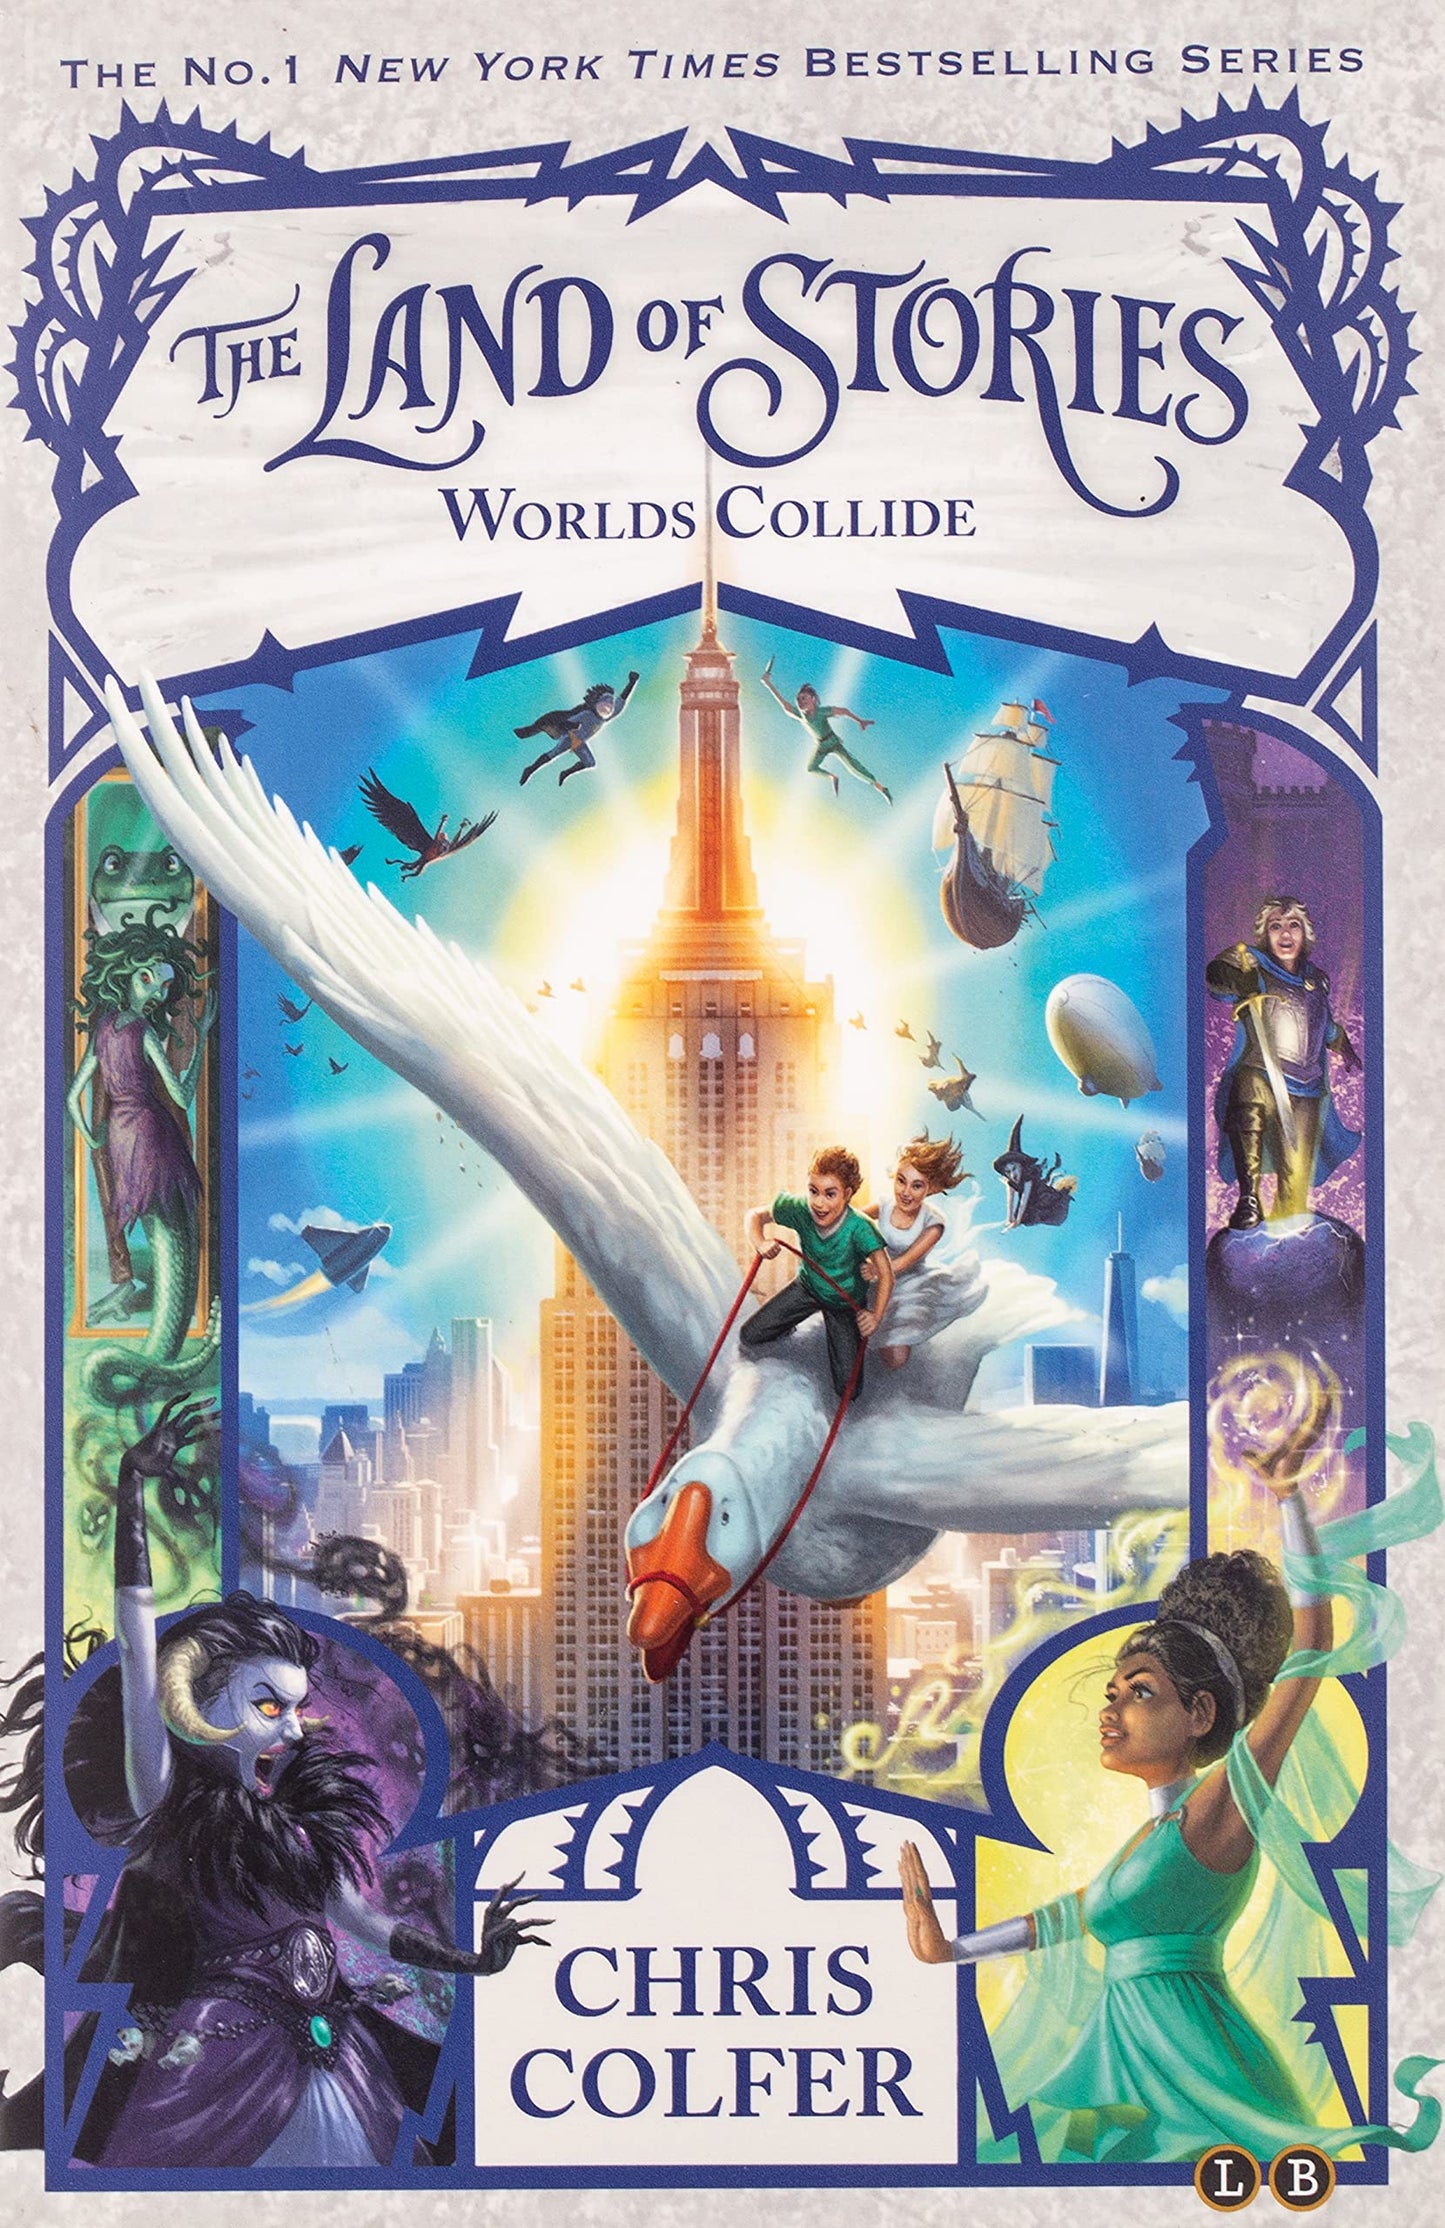 The Land of Stories - World’s Collide by Chris Colfer (Book 6)